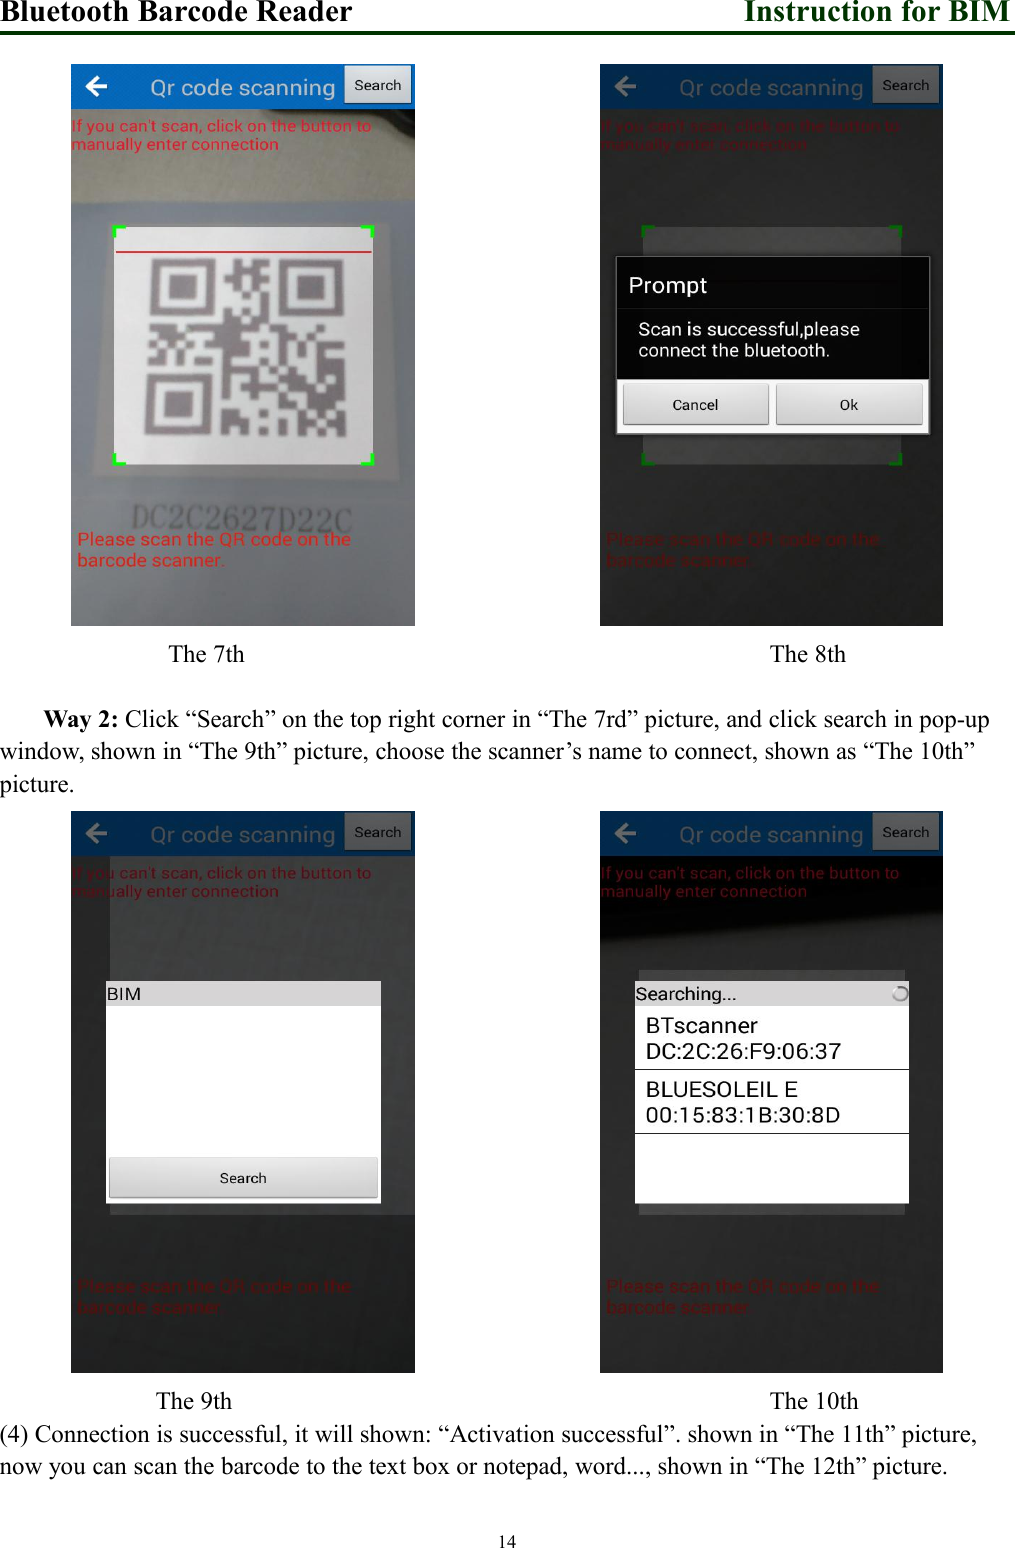 Bluetooth Barcode Reader Instruction for BIM14The 7th The 8thWay 2: Click “Search” on the top right corner in “The 7rd” picture, and click search in pop-upwindow, shown in “The 9th” picture, choose the scanner’s name to connect, shown as “The 10th”picture.The 9th The 10th(4) Connection is successful, it will shown: “Activation successful”. shown in “The 11th” picture,now you can scan the barcode to the text box or notepad, word..., shown in “The 12th” picture.